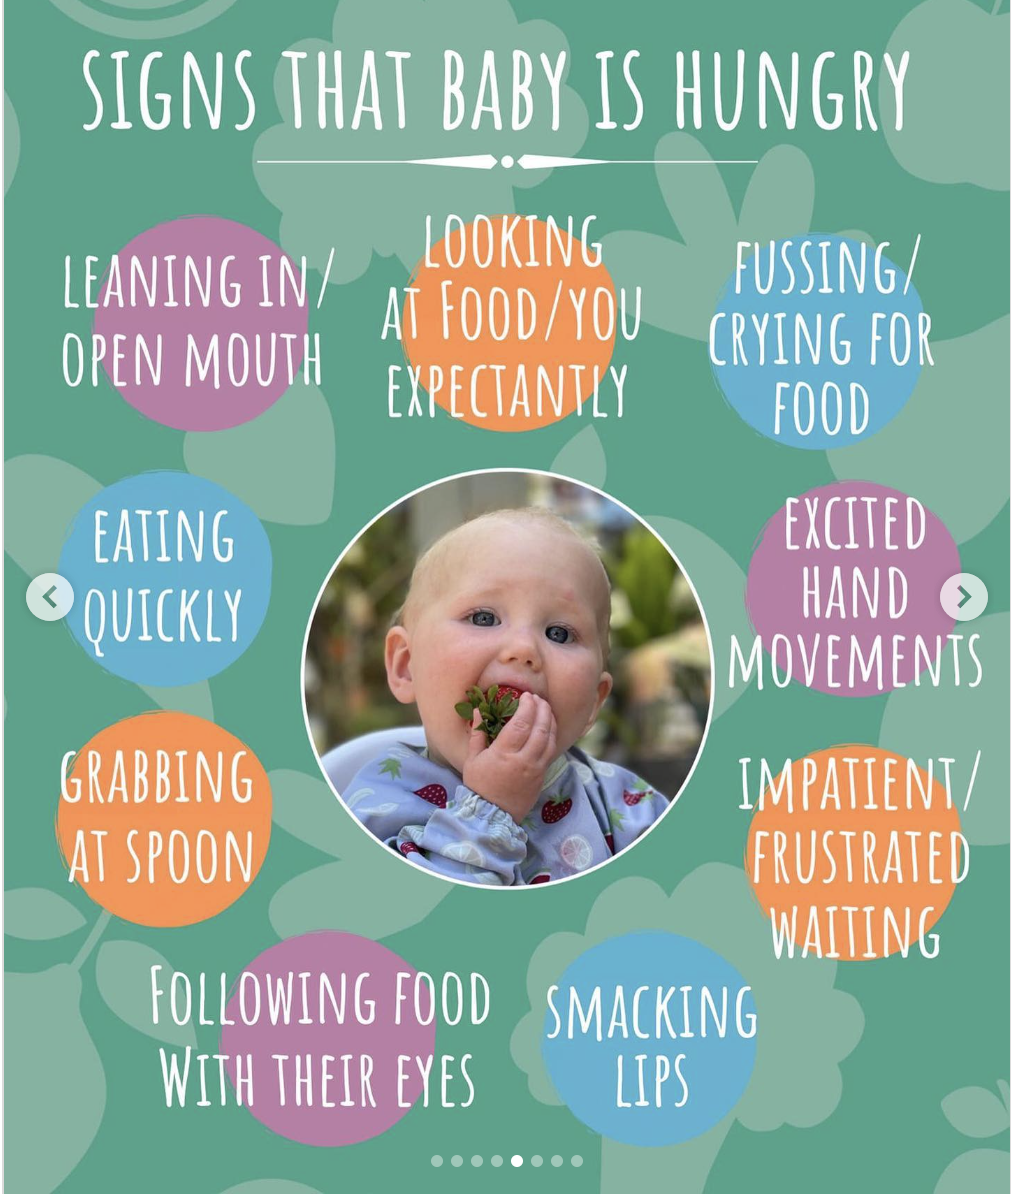 How Do I Know When My Baby Is Hungry?